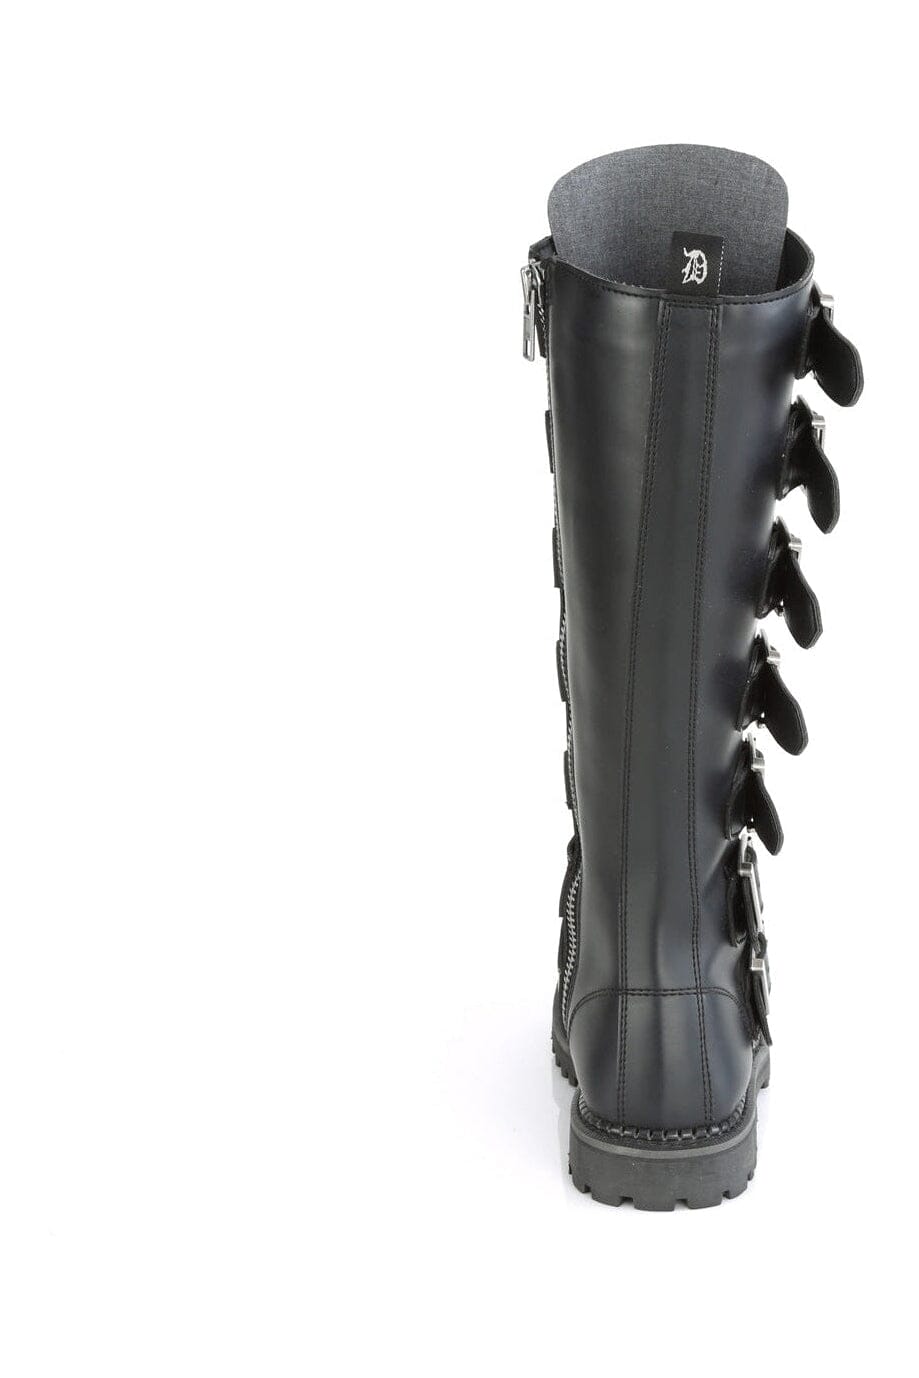 RIOT-21MP Black Vegan Leather Knee Boot-Knee Boots-Demonia-SEXYSHOES.COM